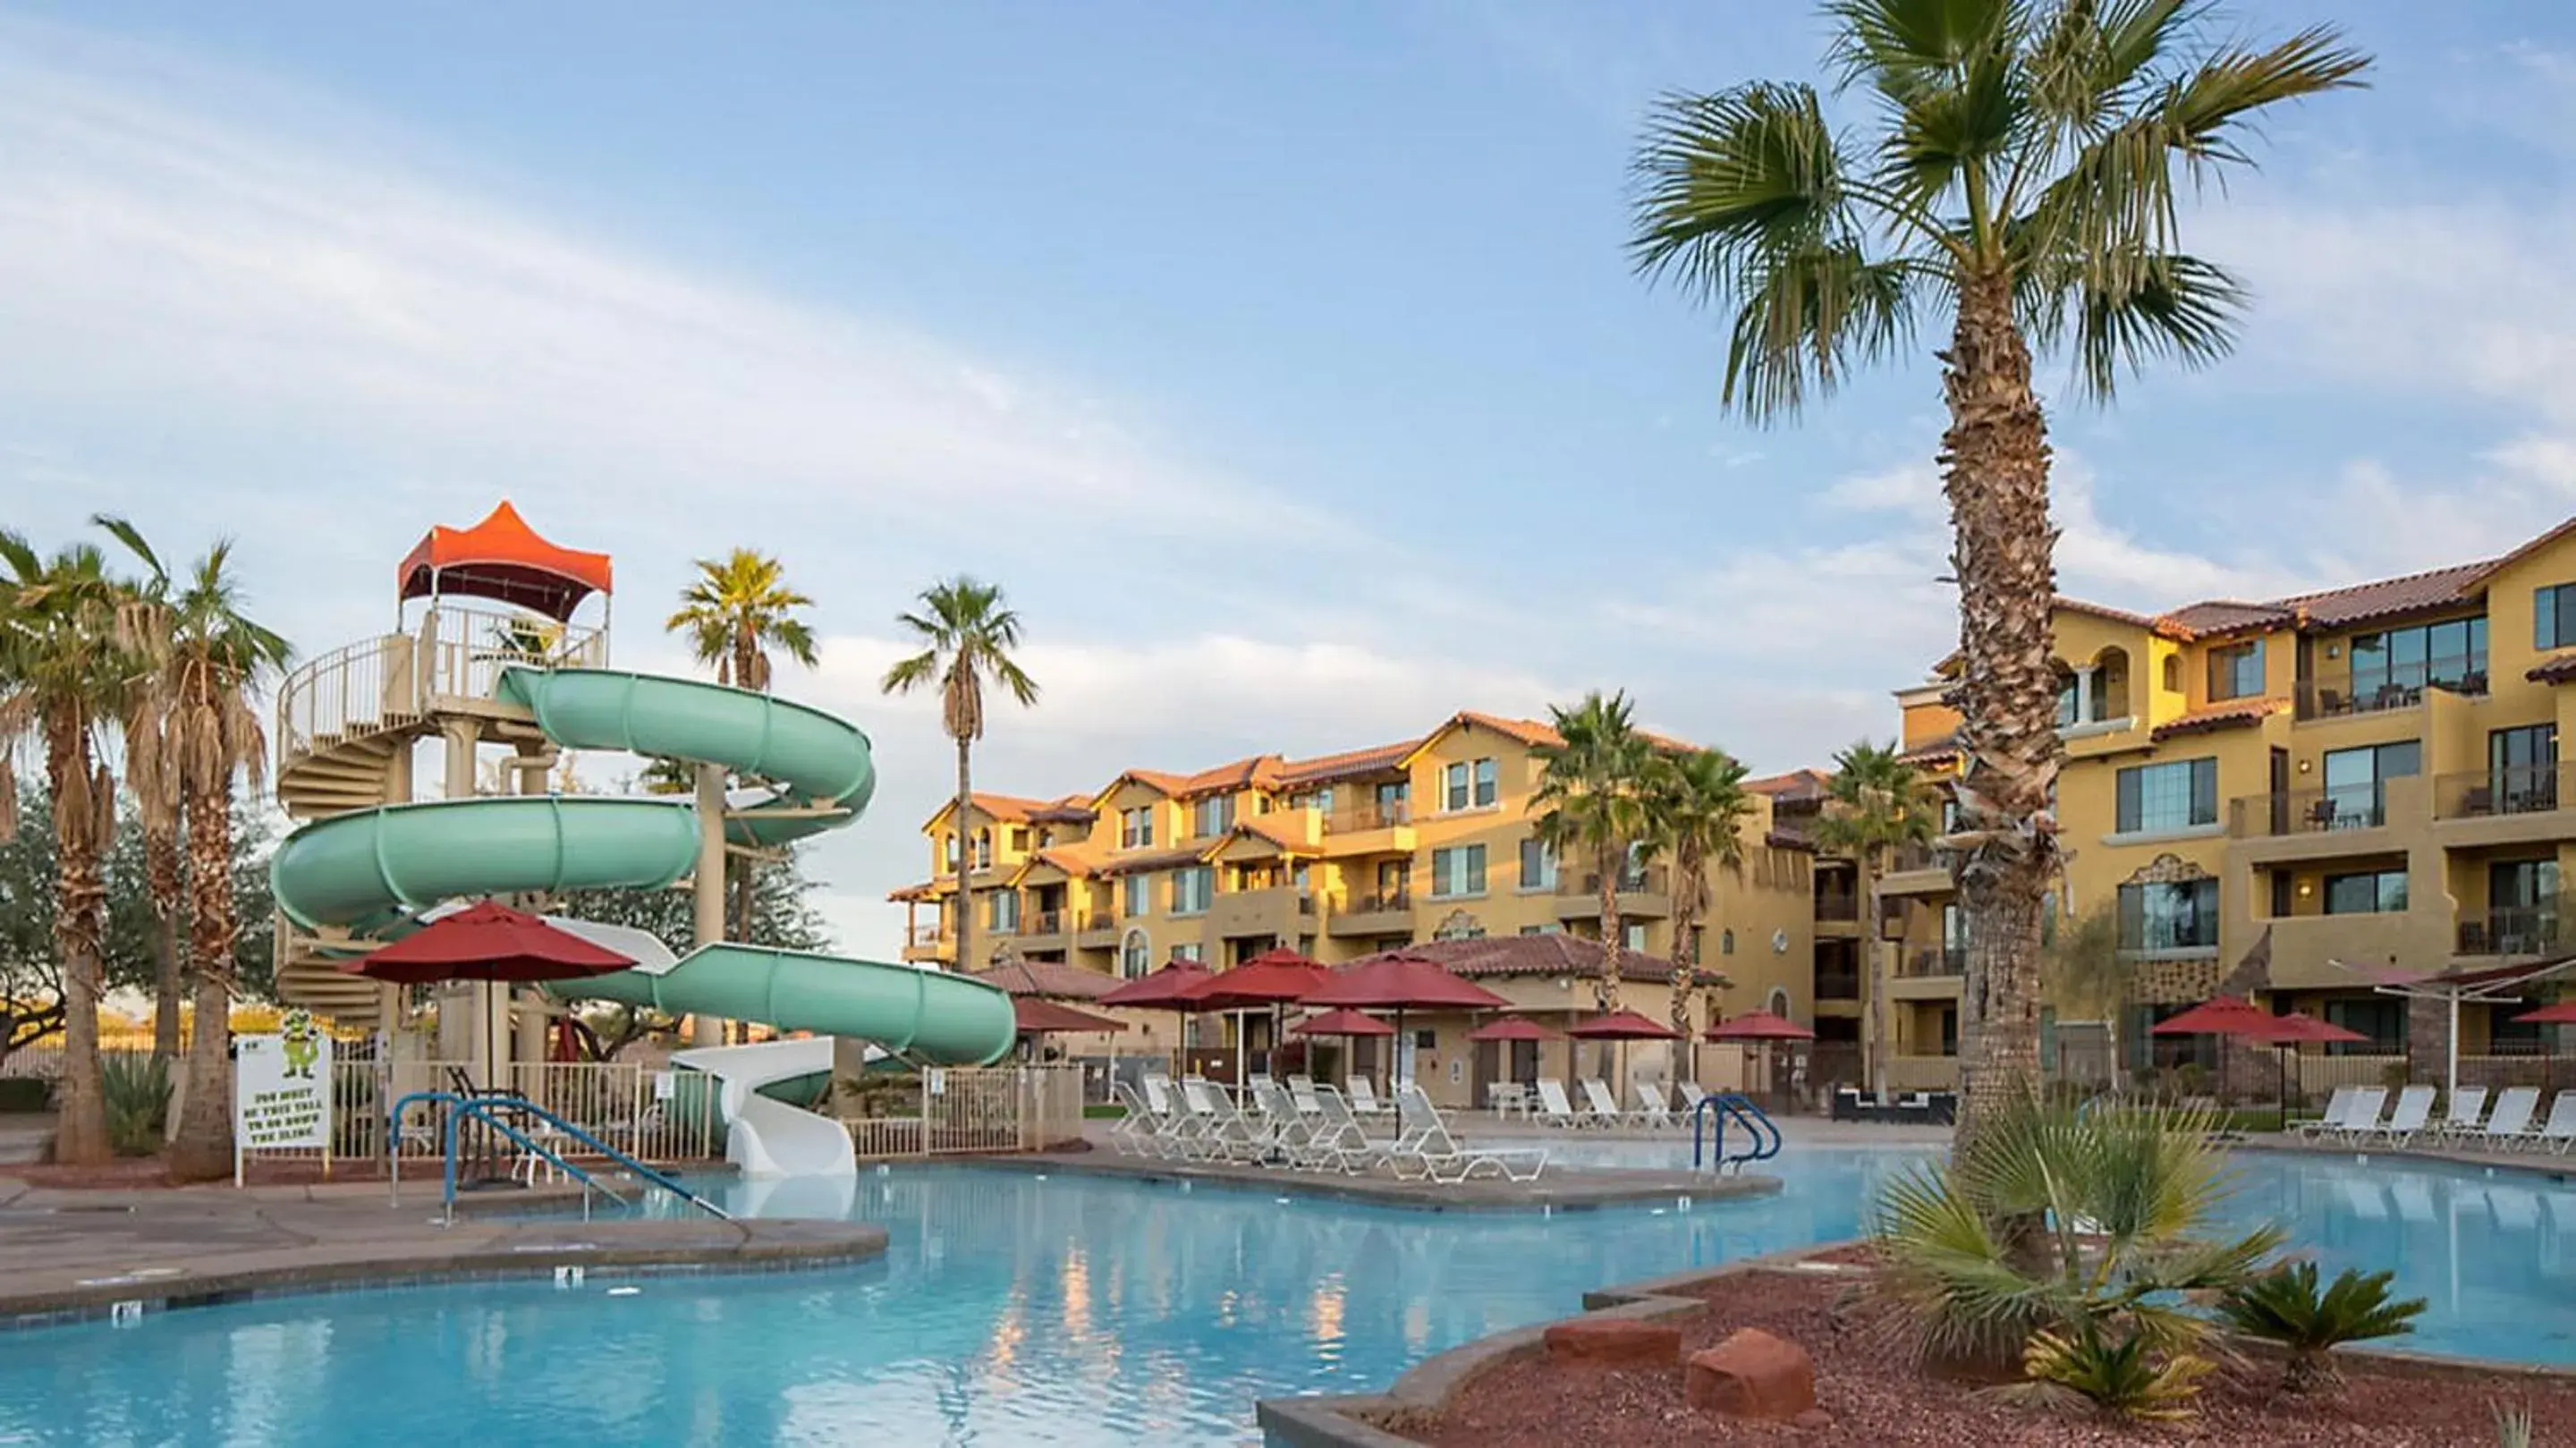 Swimming pool, Water Park in Bluegreen Vacations Cibola Vista Resort & Spa, An Ascend Resort